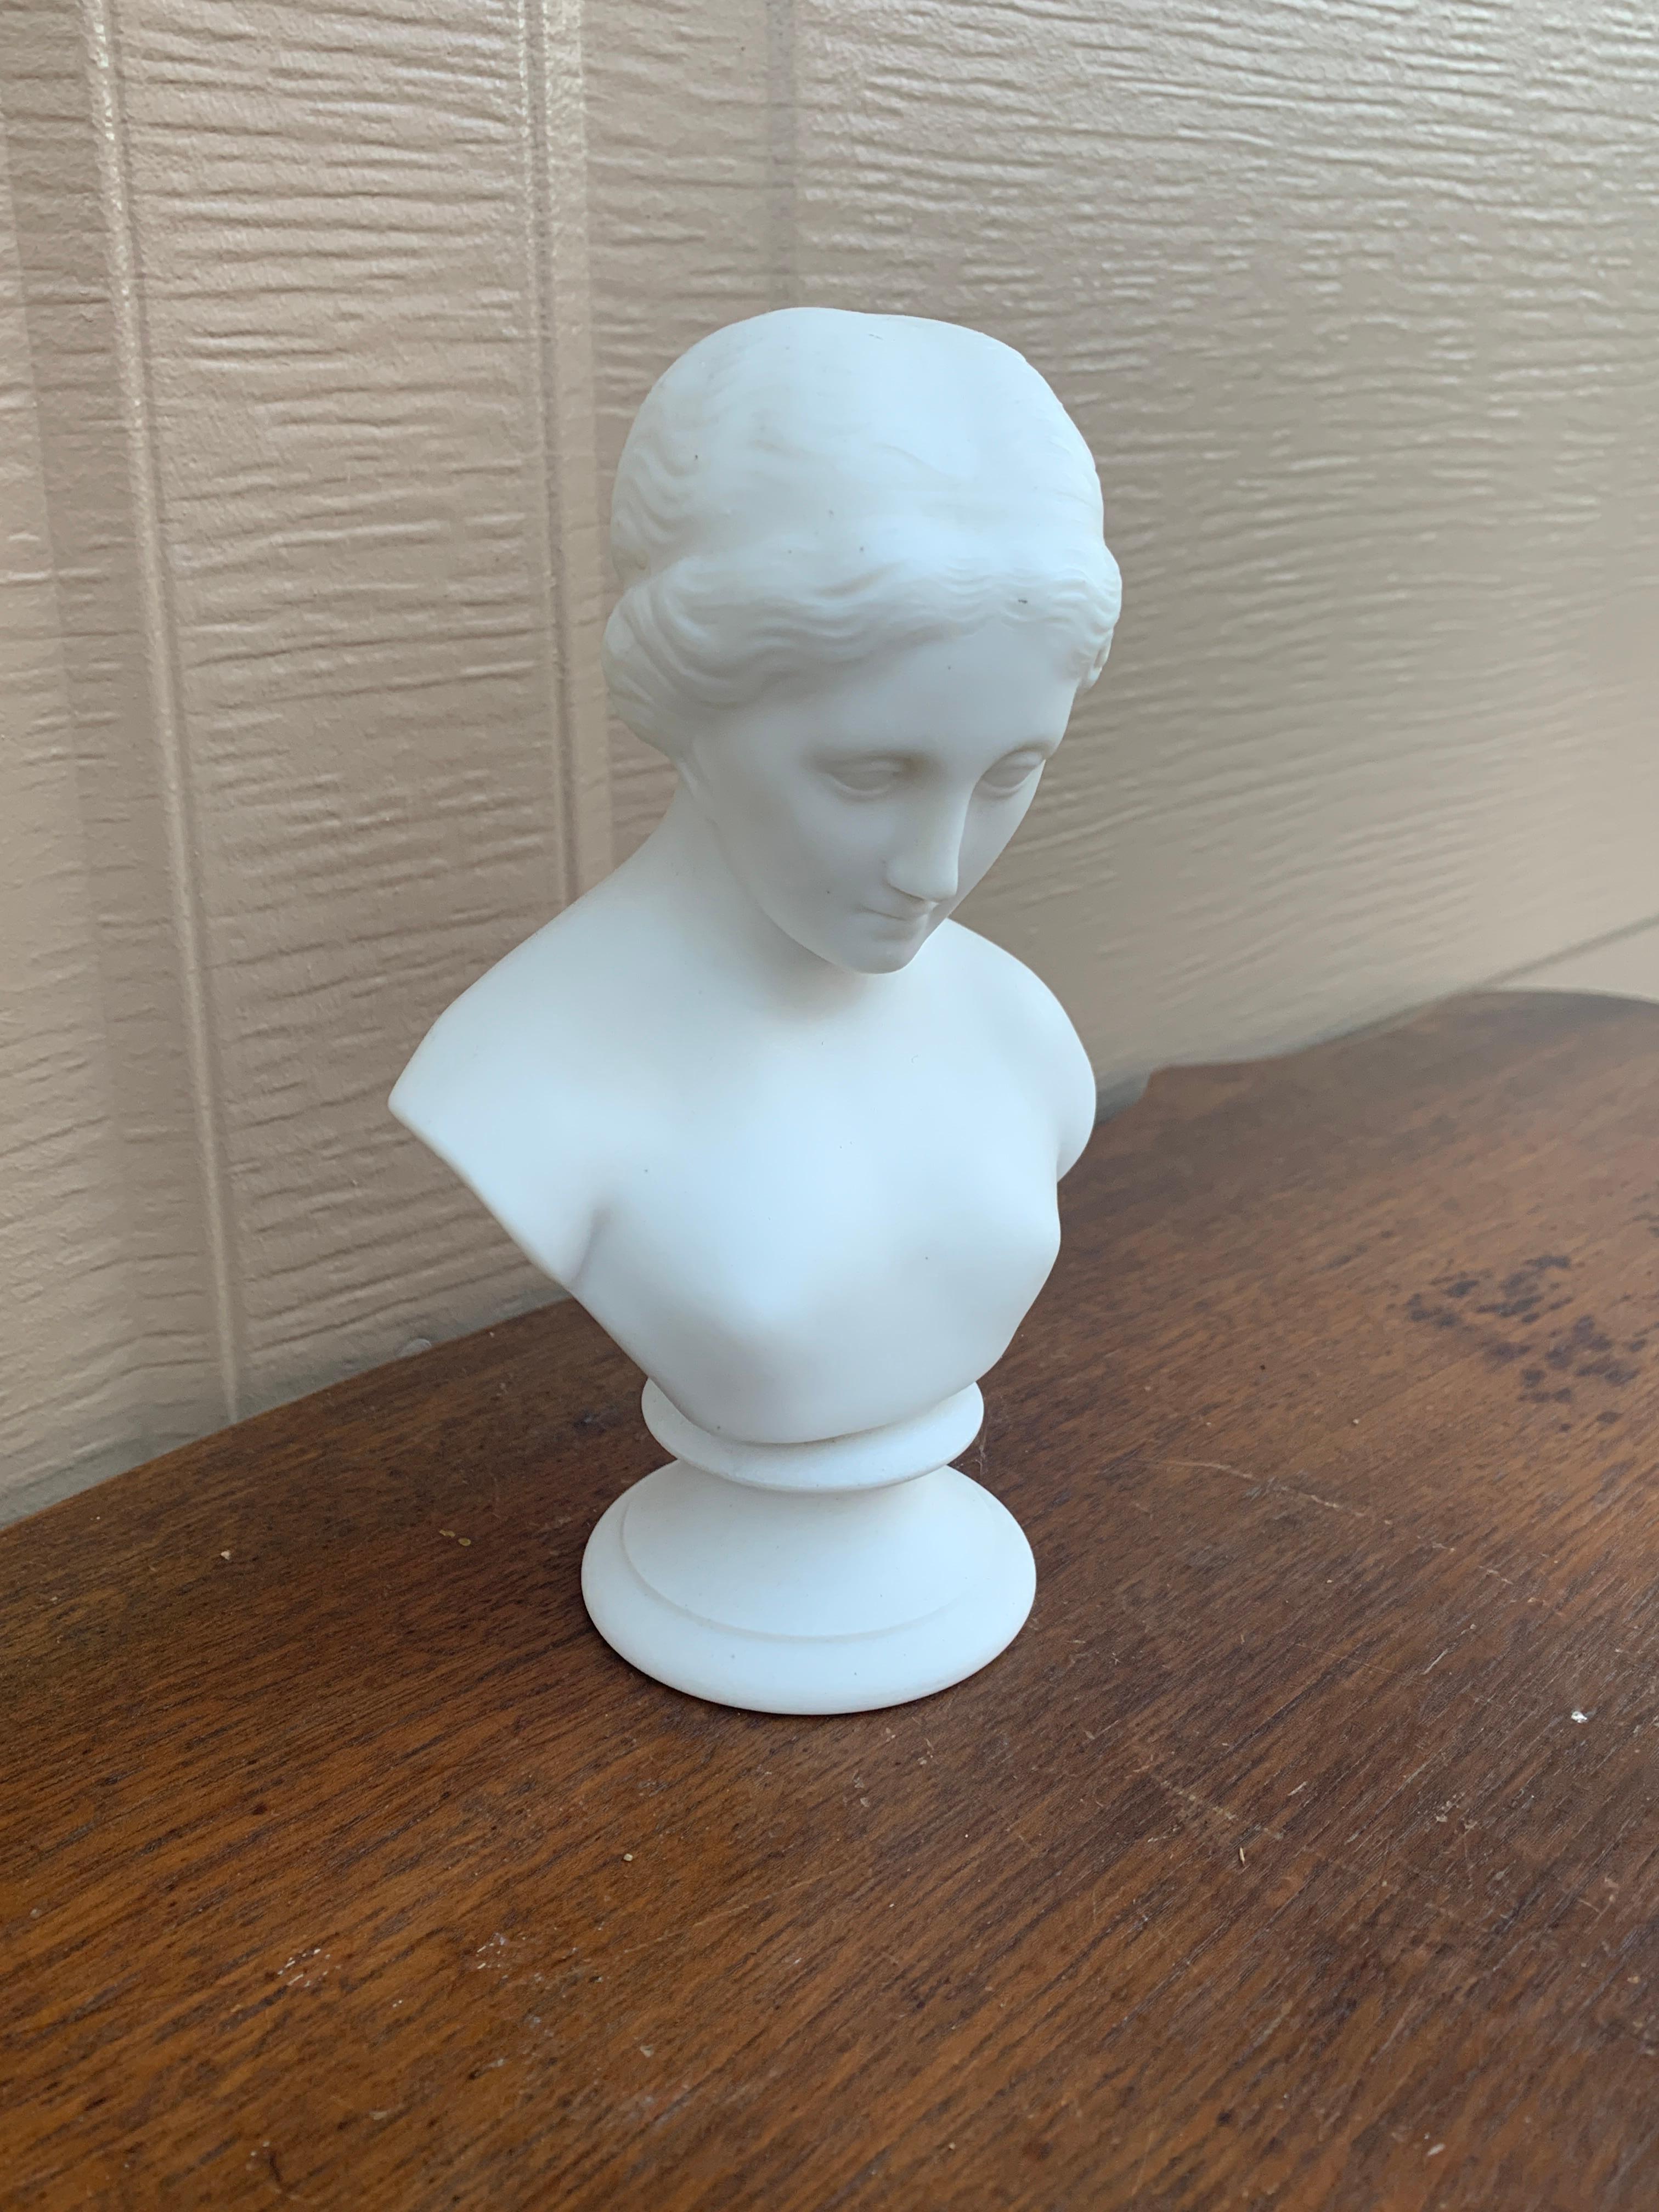 Vintage Classical Female Parian Porcelain Bust Sculpture In Good Condition For Sale In Elkhart, IN